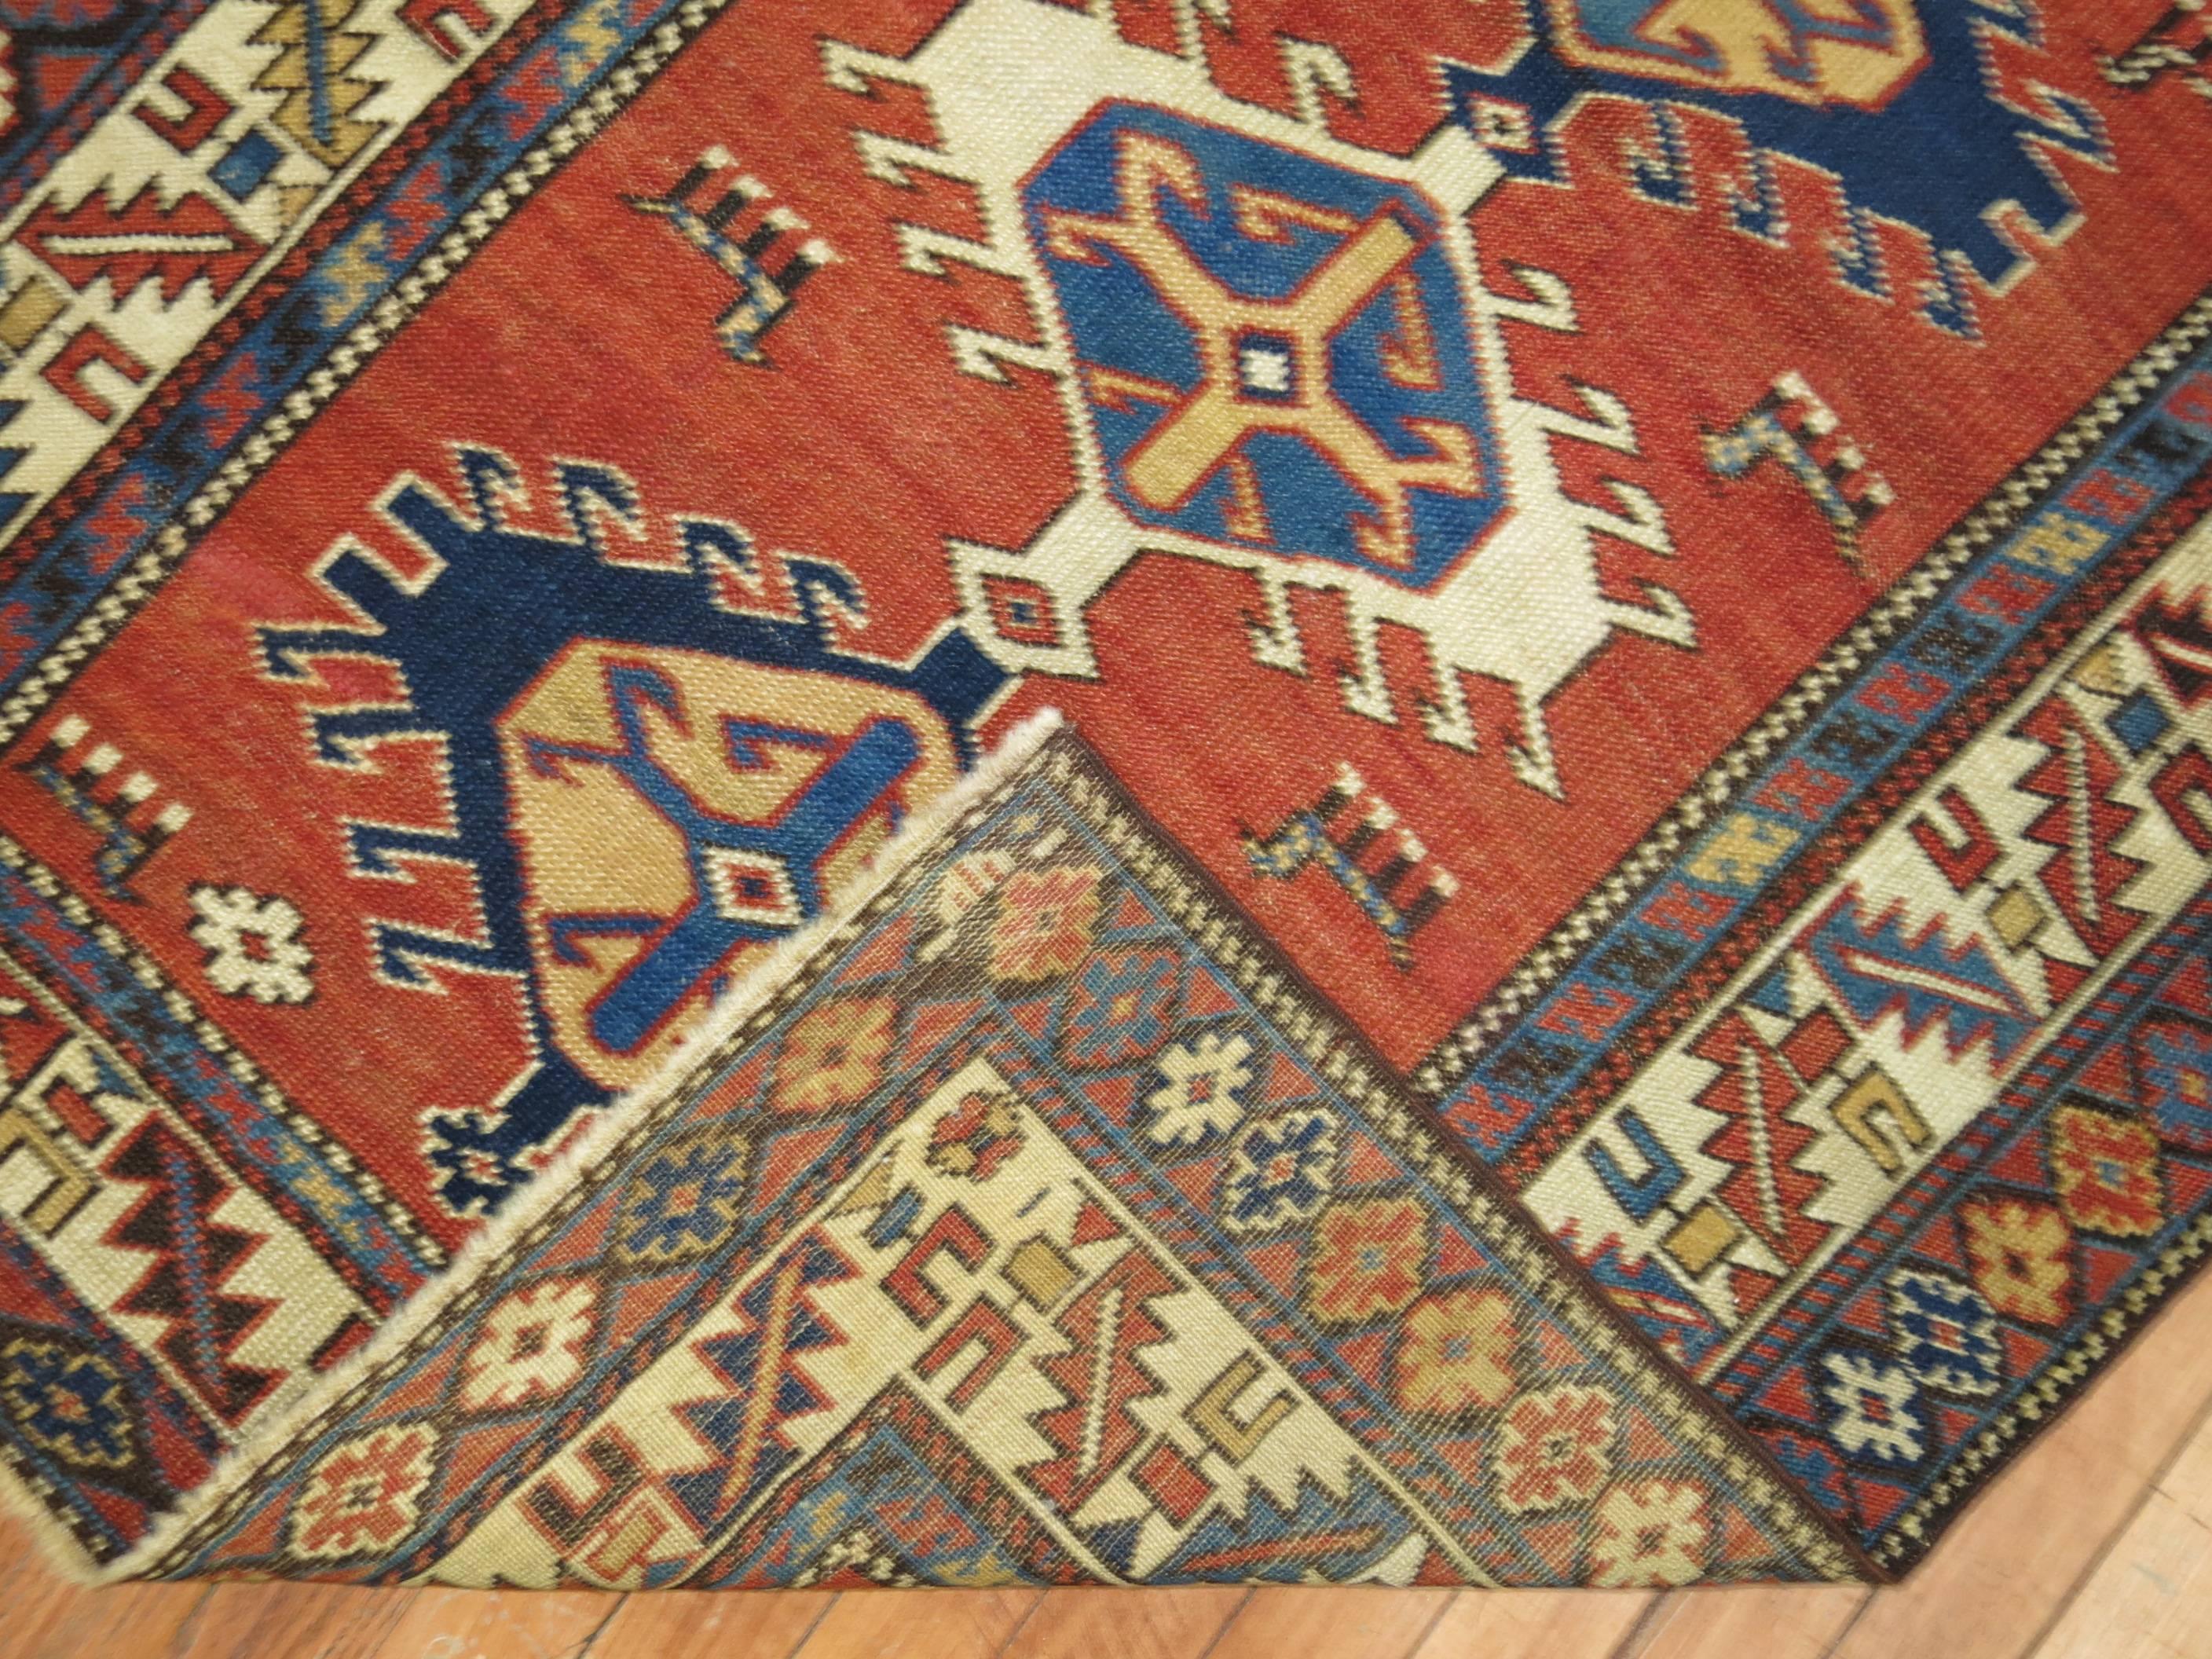 A geometric tribal looking Caucasian shirvan rug from the early part of the 20th century.

Antique Caucasian rugs from the Shirvan district village are still considered one of the best decorative and collector type of rugs from that the Caucasian